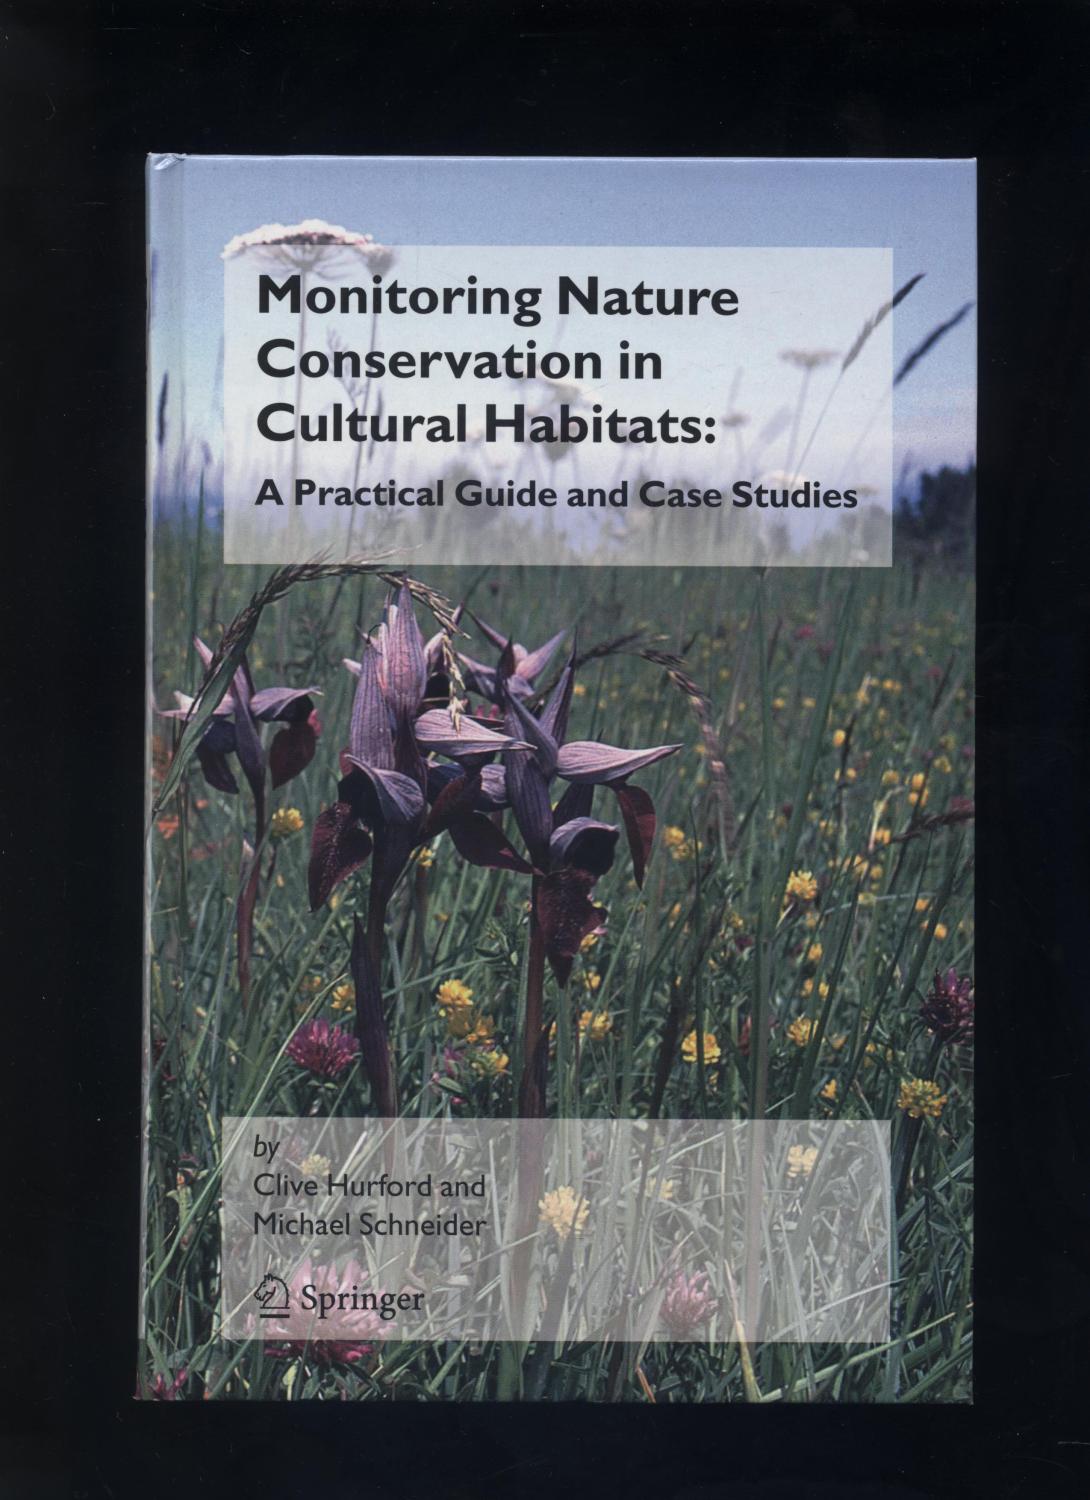 Monitoring Nature Conservation in Cultural Habitats: A Practical Guide and Case Studies - Hurford, Clive and Schneider, Michael